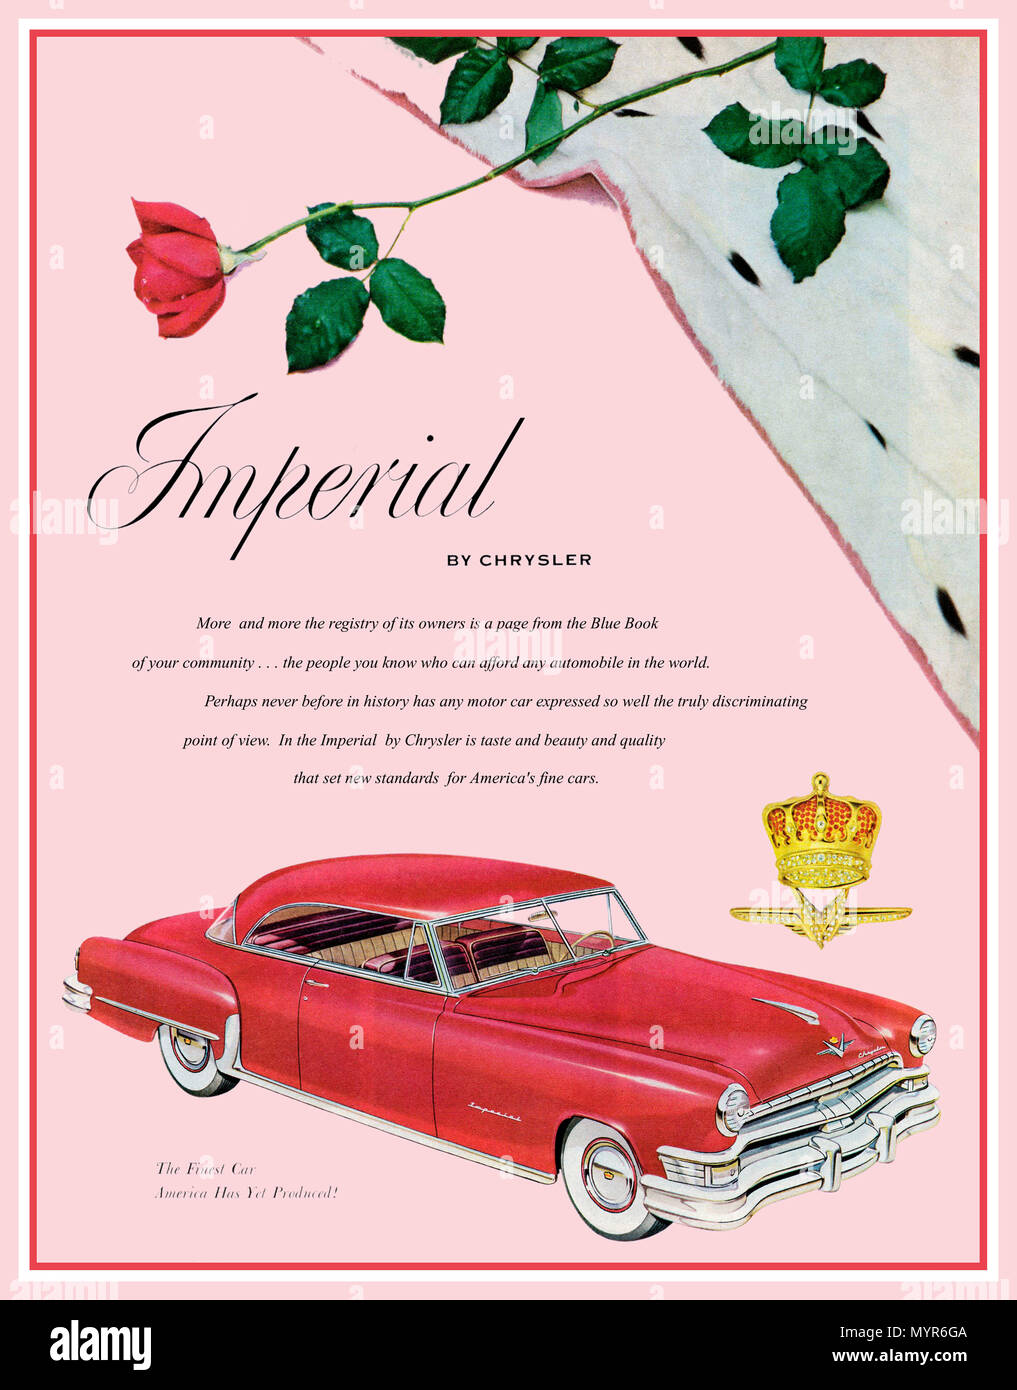 CHRYSLER IMPERIAL 1950's Vintage American Car Automobile Press Advertisement and Poster for Red Chrysler Imperial Vintage Car 2 door Coupe Stock Photo